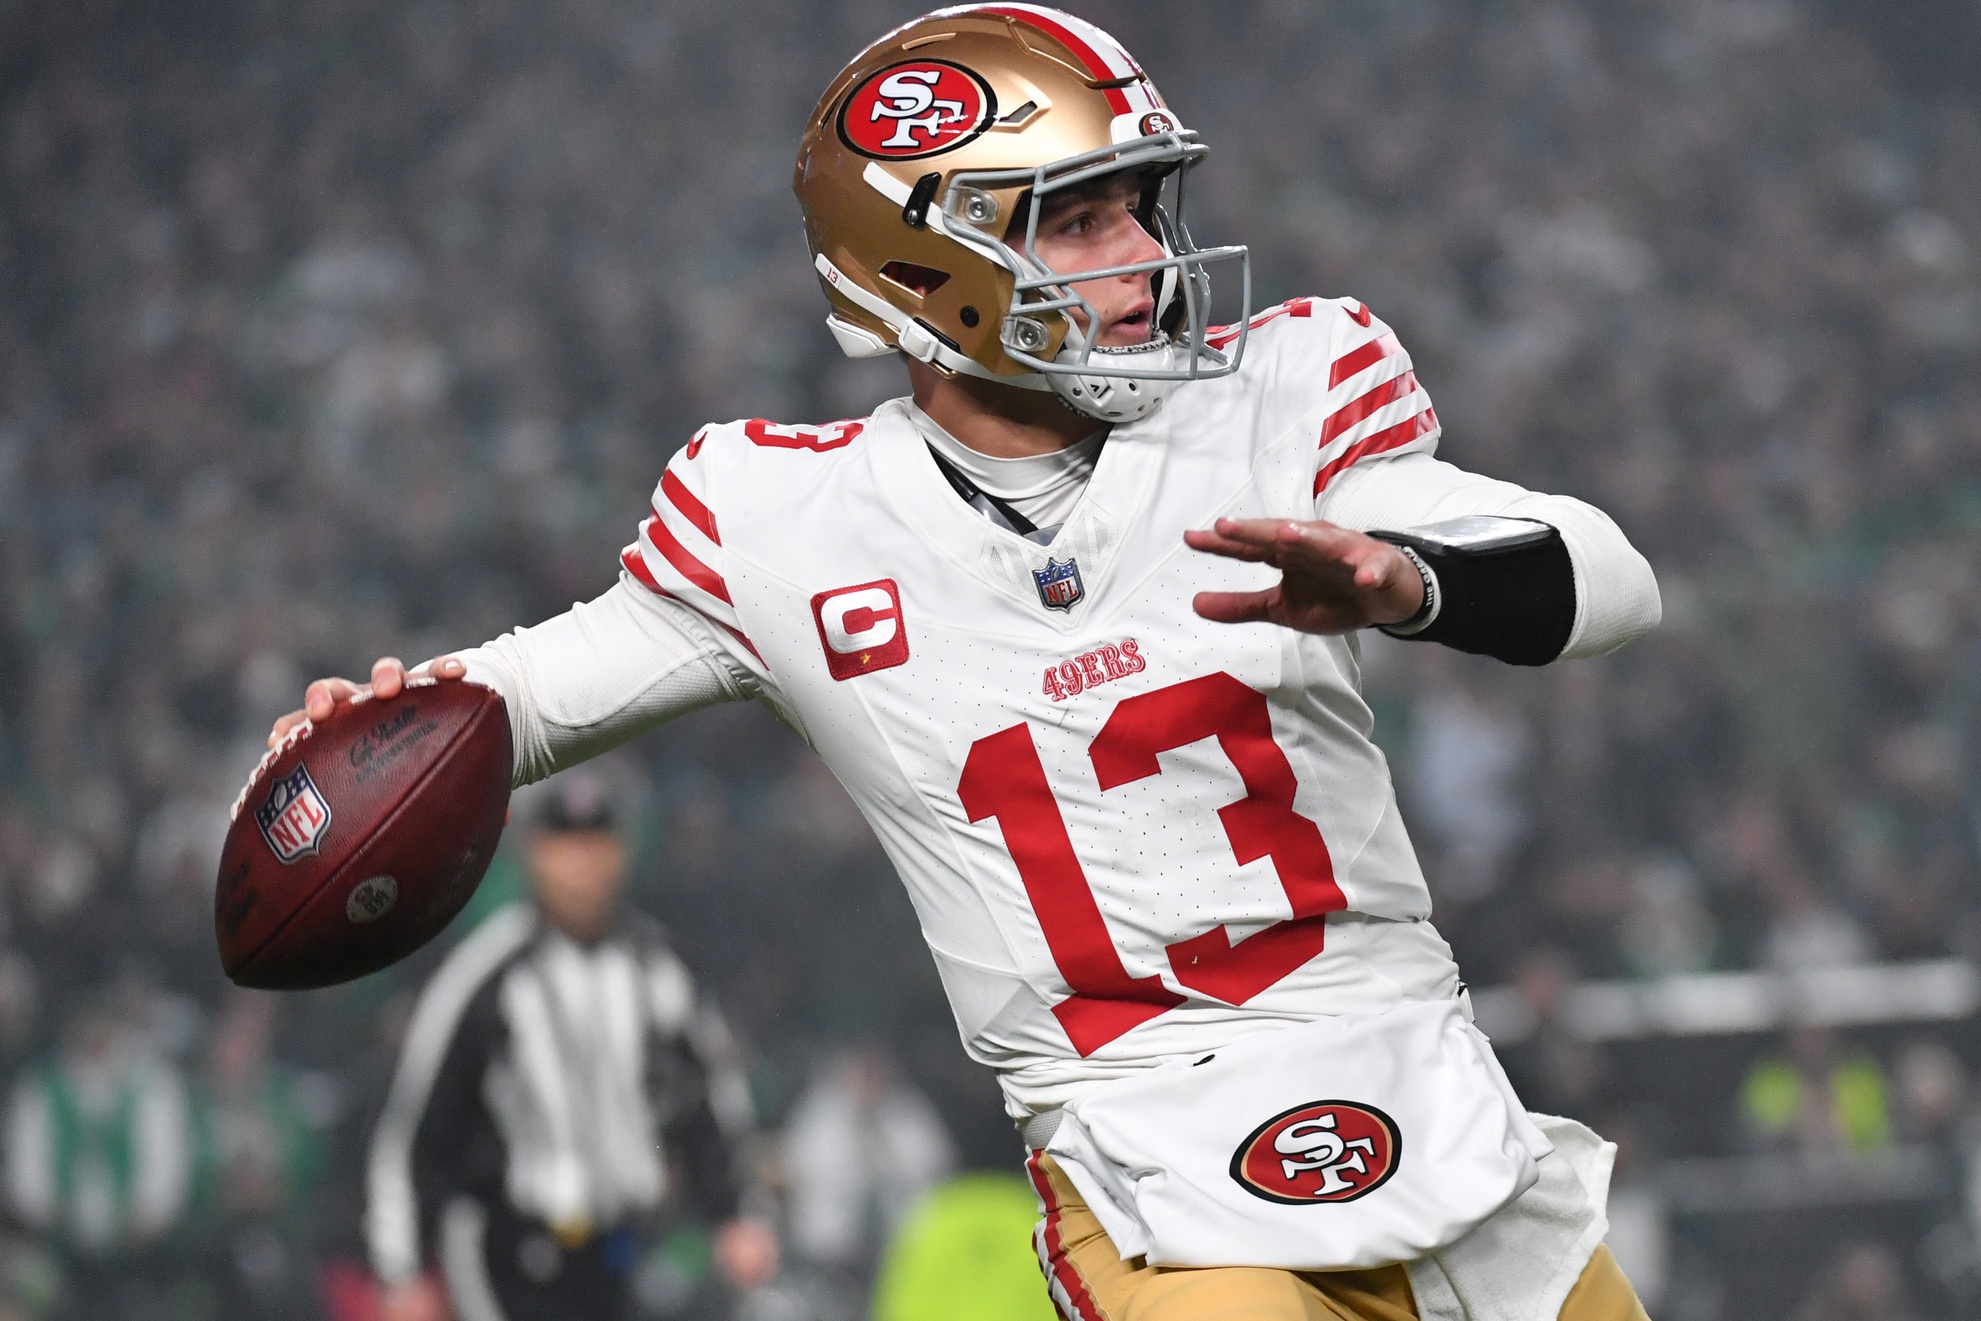 49ers quarterback Brock Purdy tossed three touchdowns against the Eagles, igniting San Francisco past the defending NFC champions. Purdy was knocked out of the 2022 NFC championship against the Eagles with an arm injury.